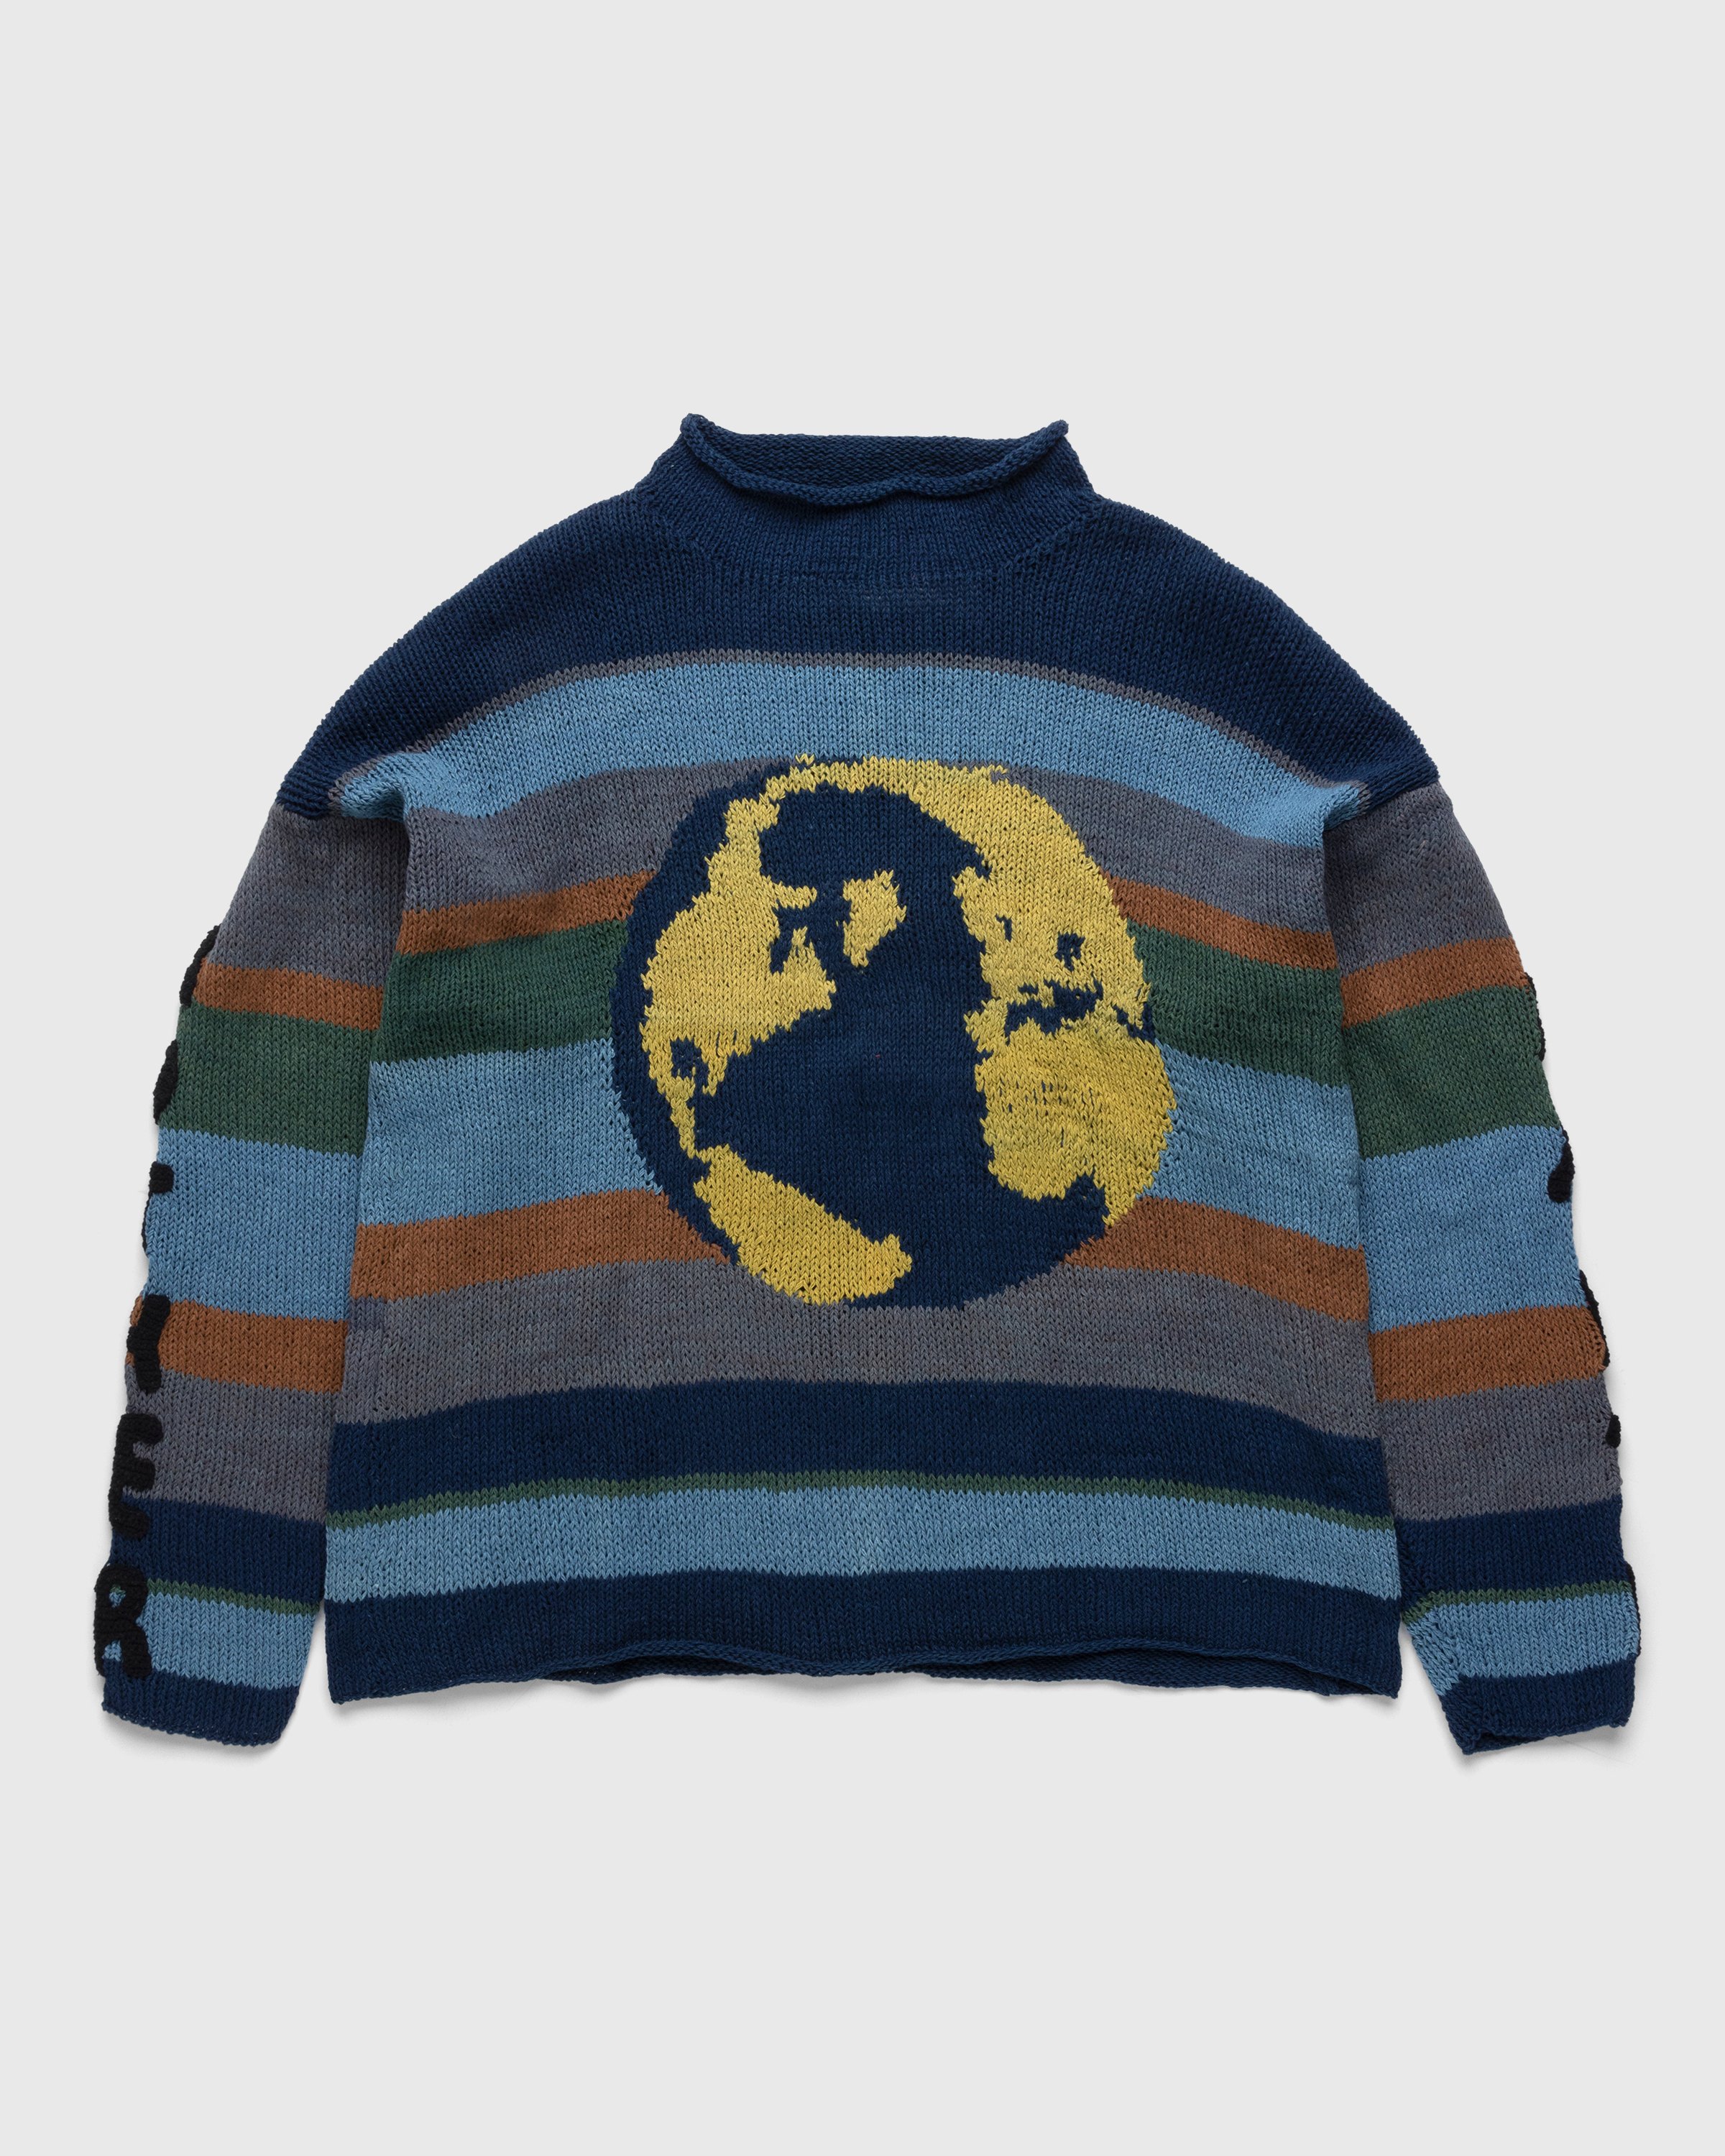 Story mfg. - Twinsun Rollneck Striped Mother Earth Multi - Clothing - Multi - Image 1